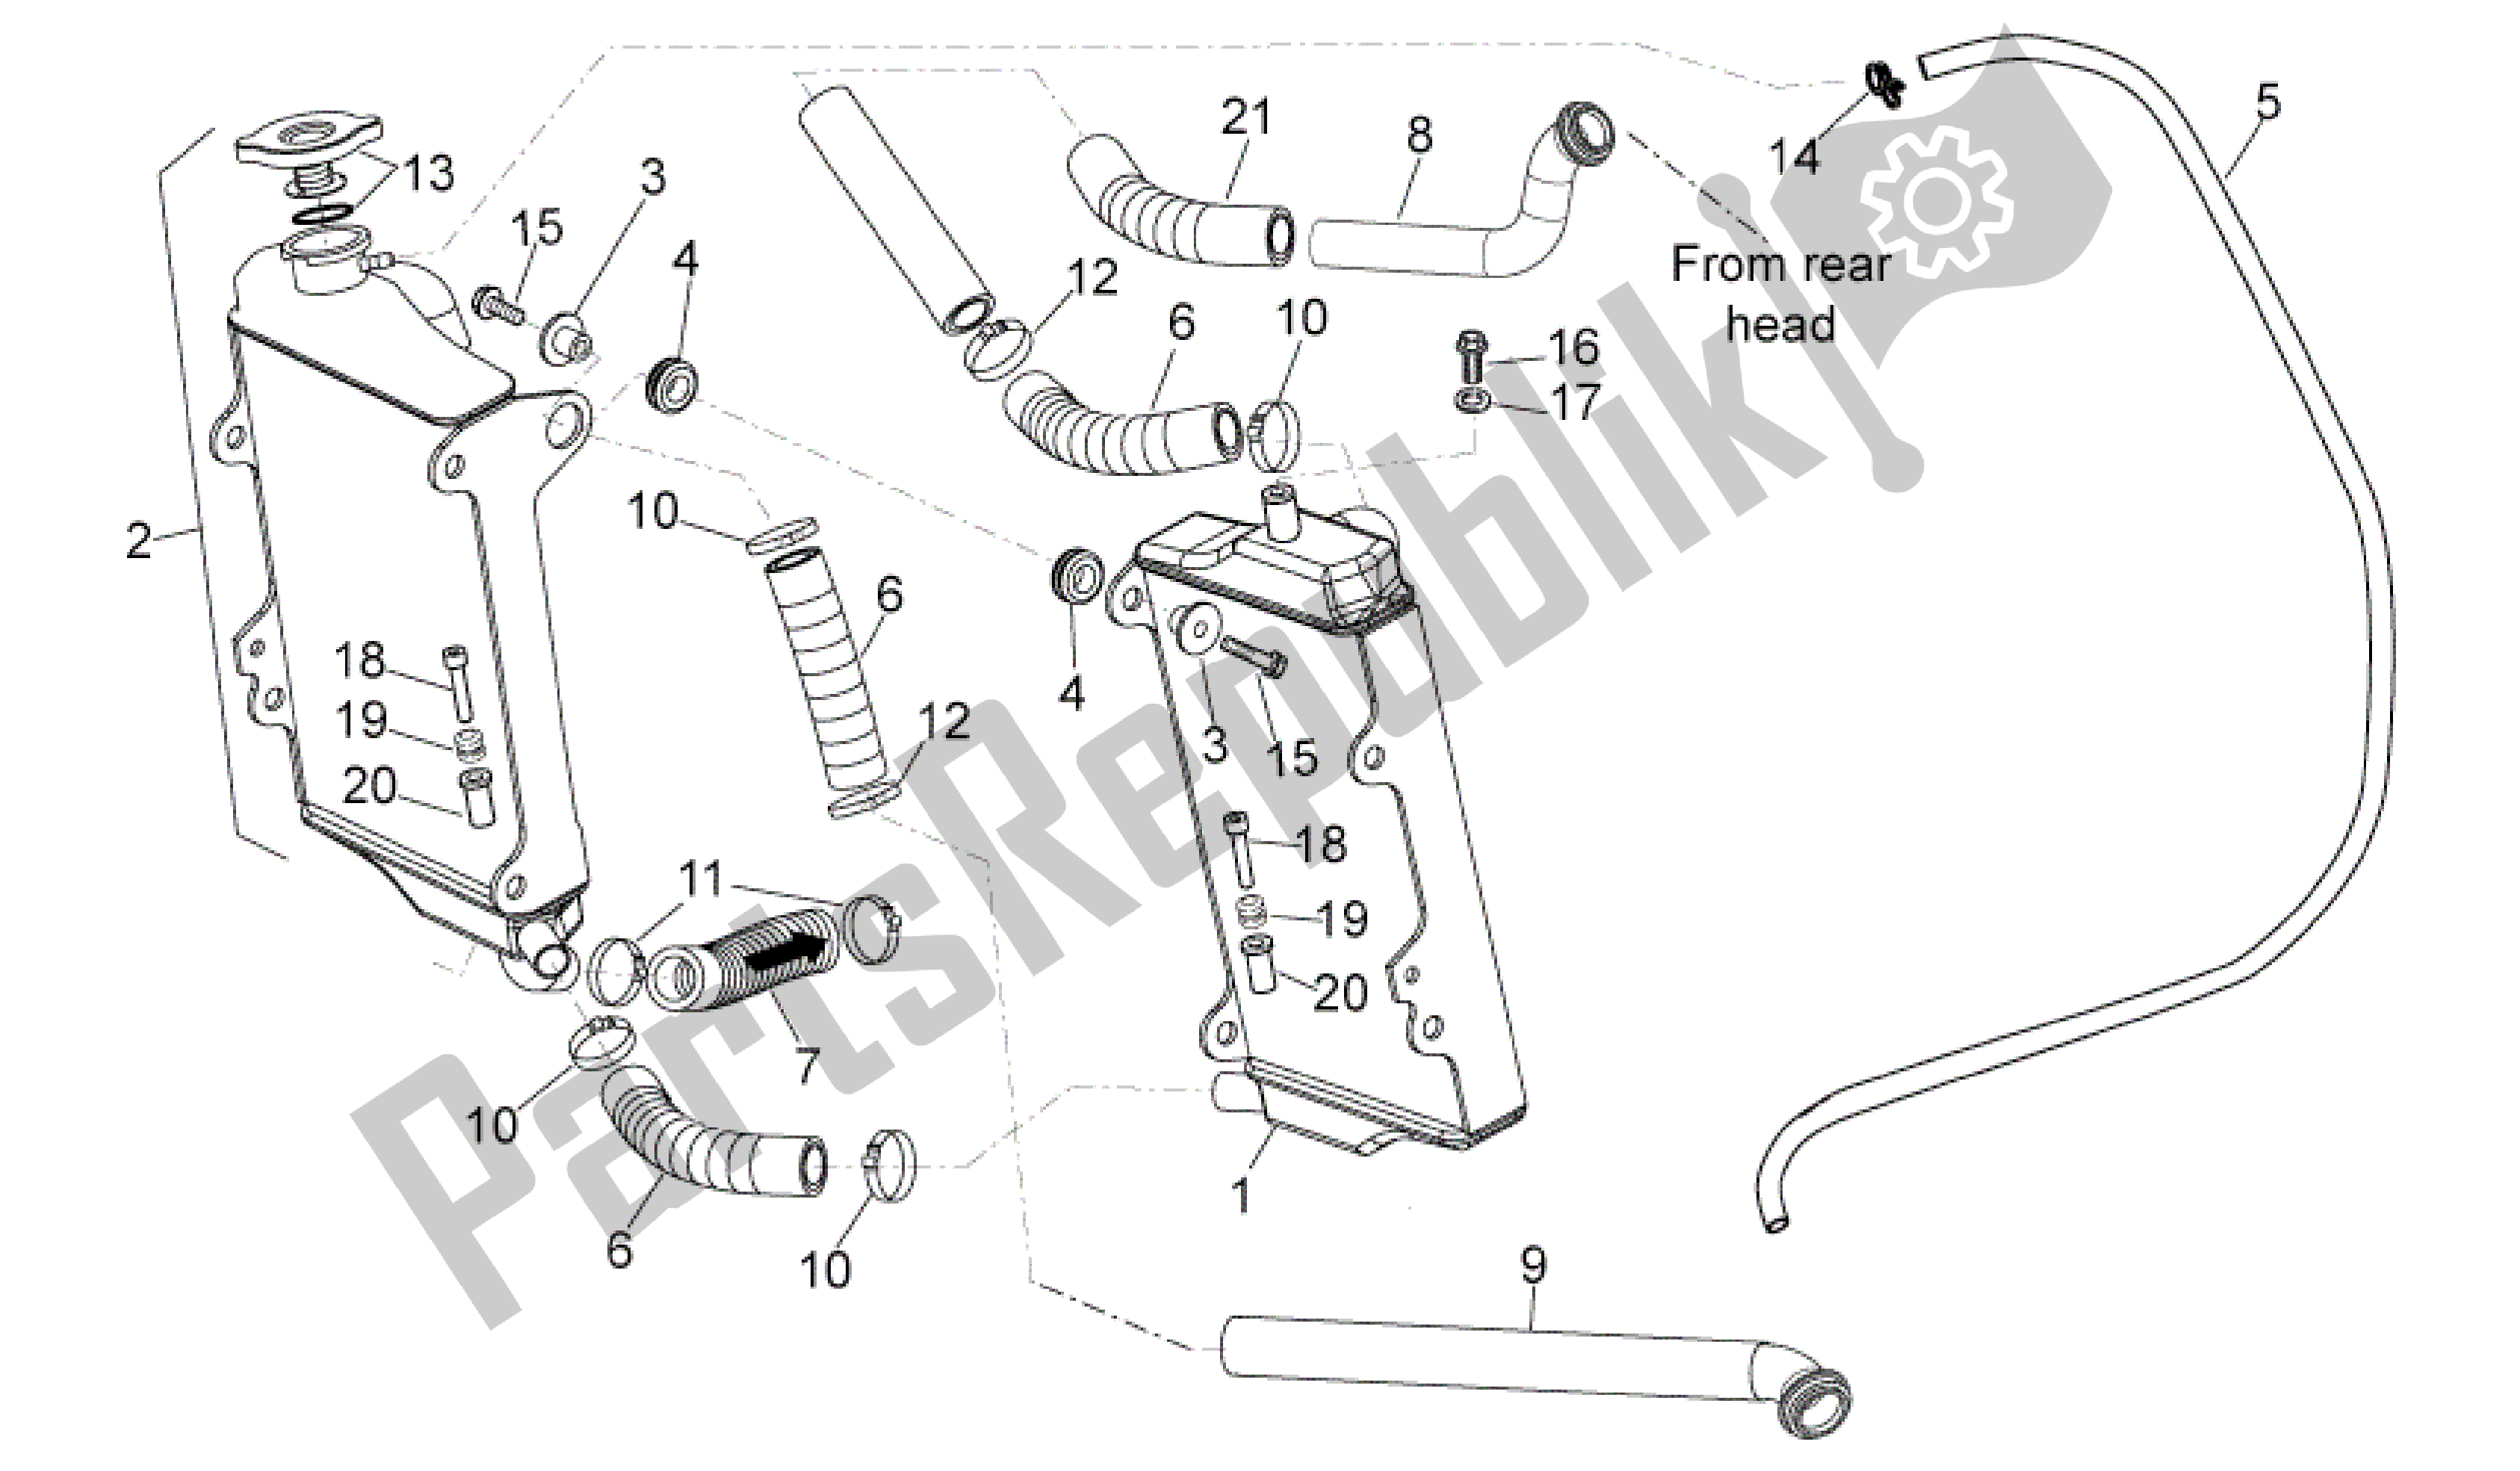 All parts for the Cooling System of the Aprilia MXV 450 2008 - 2010